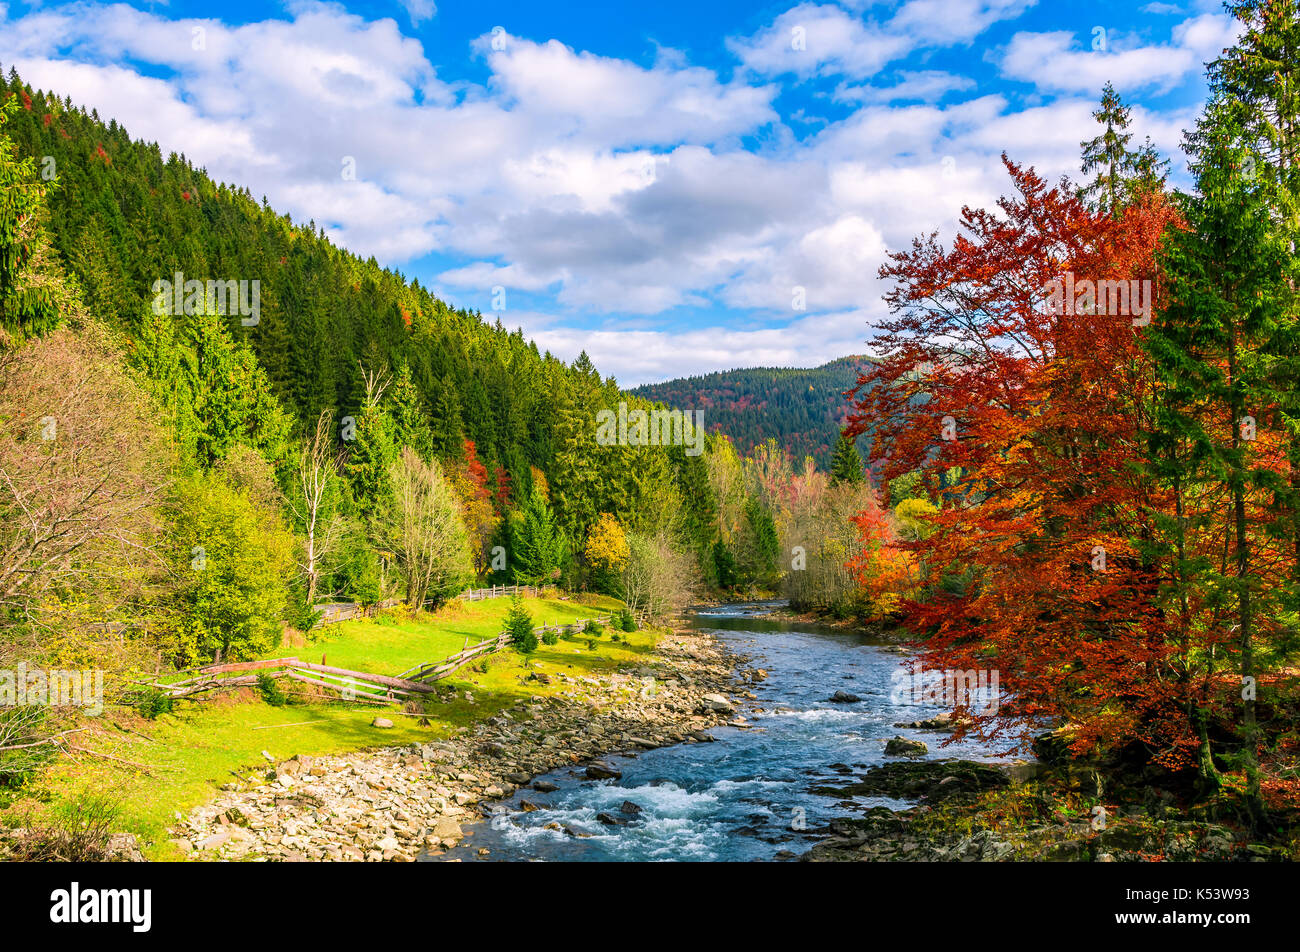 gorgeous day near the forest river in mountains. deciduous tree with vivid red foliage among spruce on the curve rocky shore. dreamy autumnal landscap Stock Photo